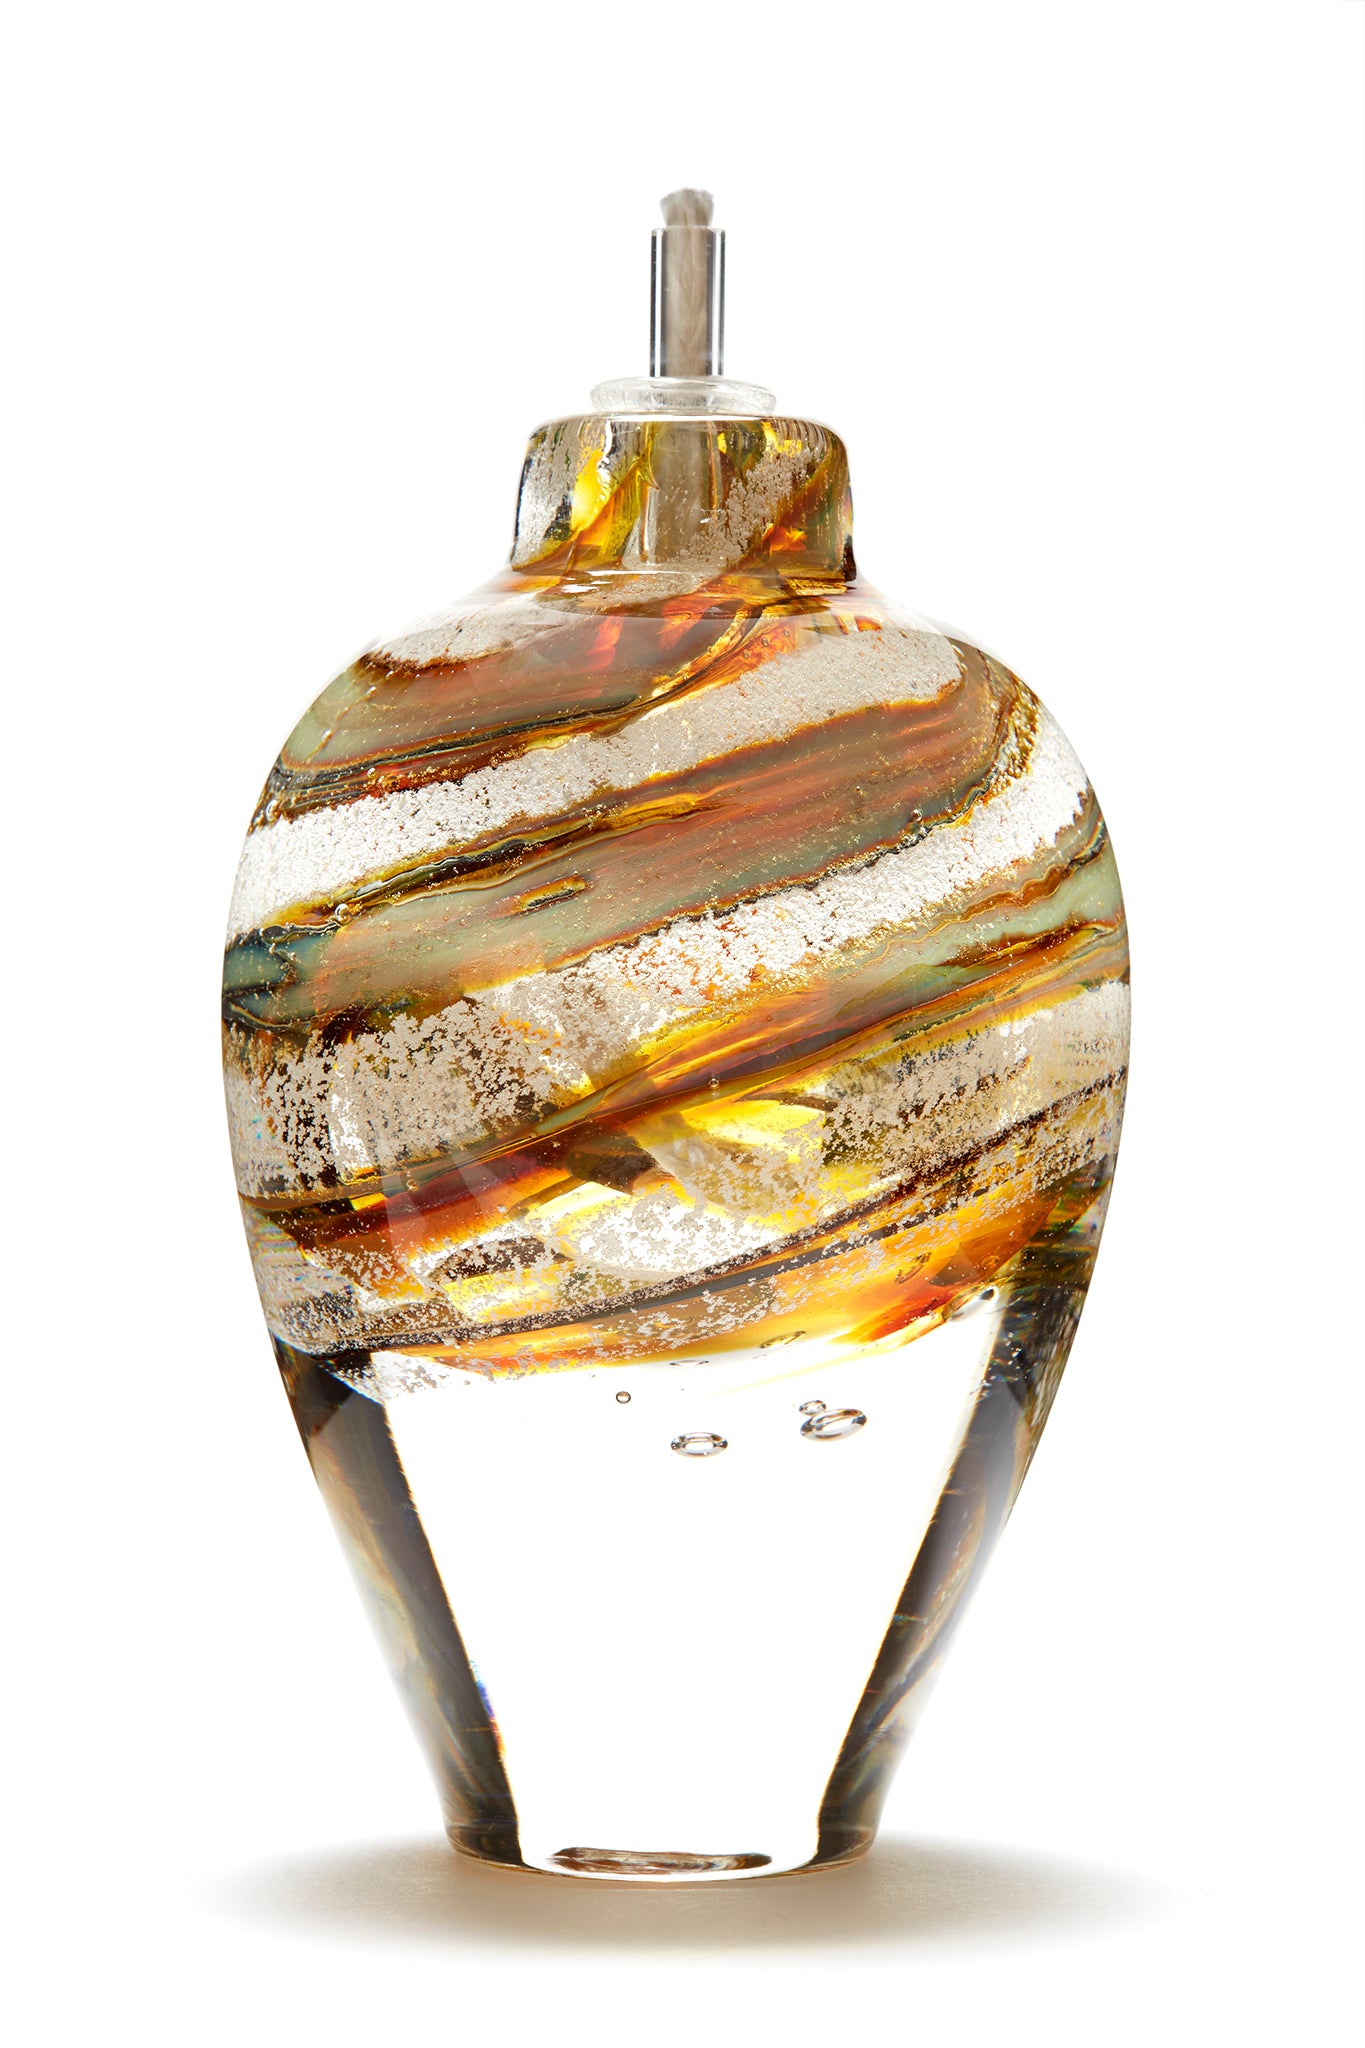 Load image into Gallery viewer, Memorial glass art tall eternal flame oil lamp with cremation ash. Iris gold glass.
